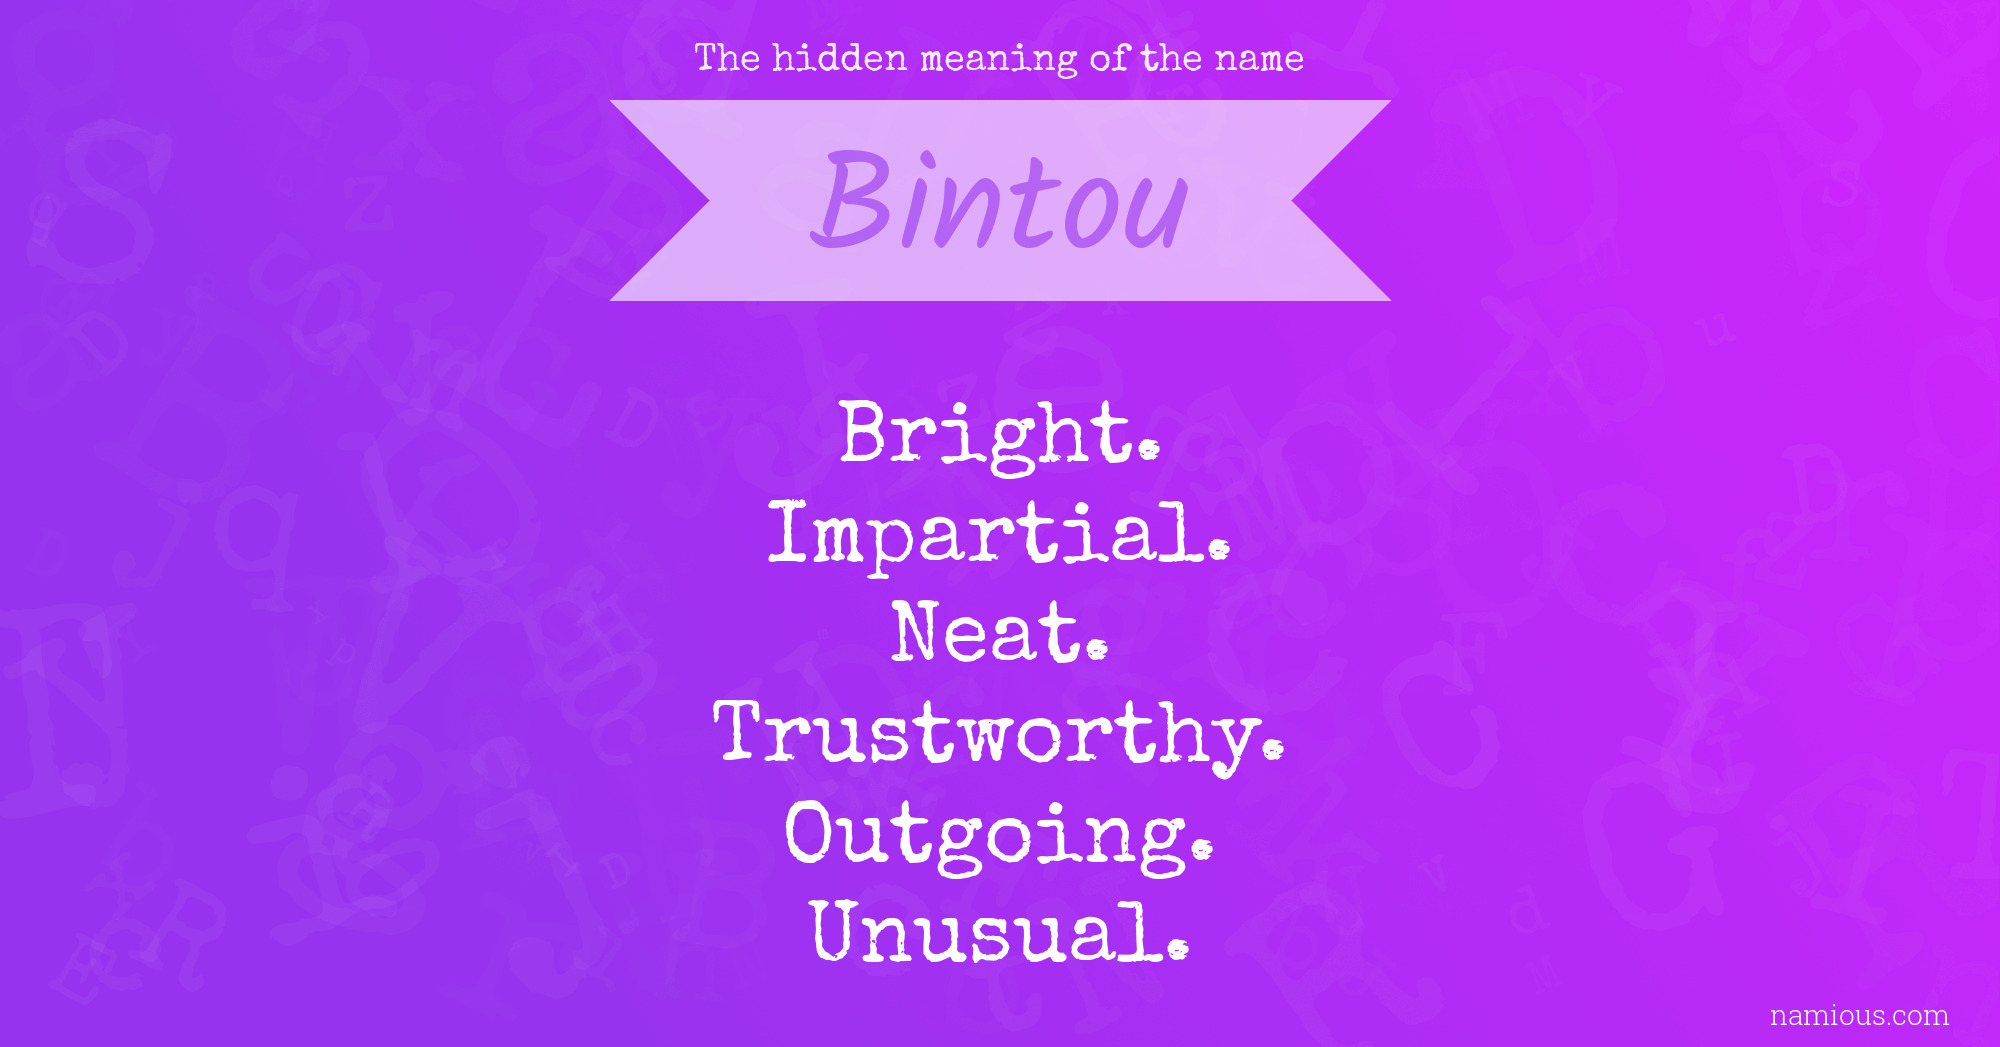 The hidden meaning of the name Bintou